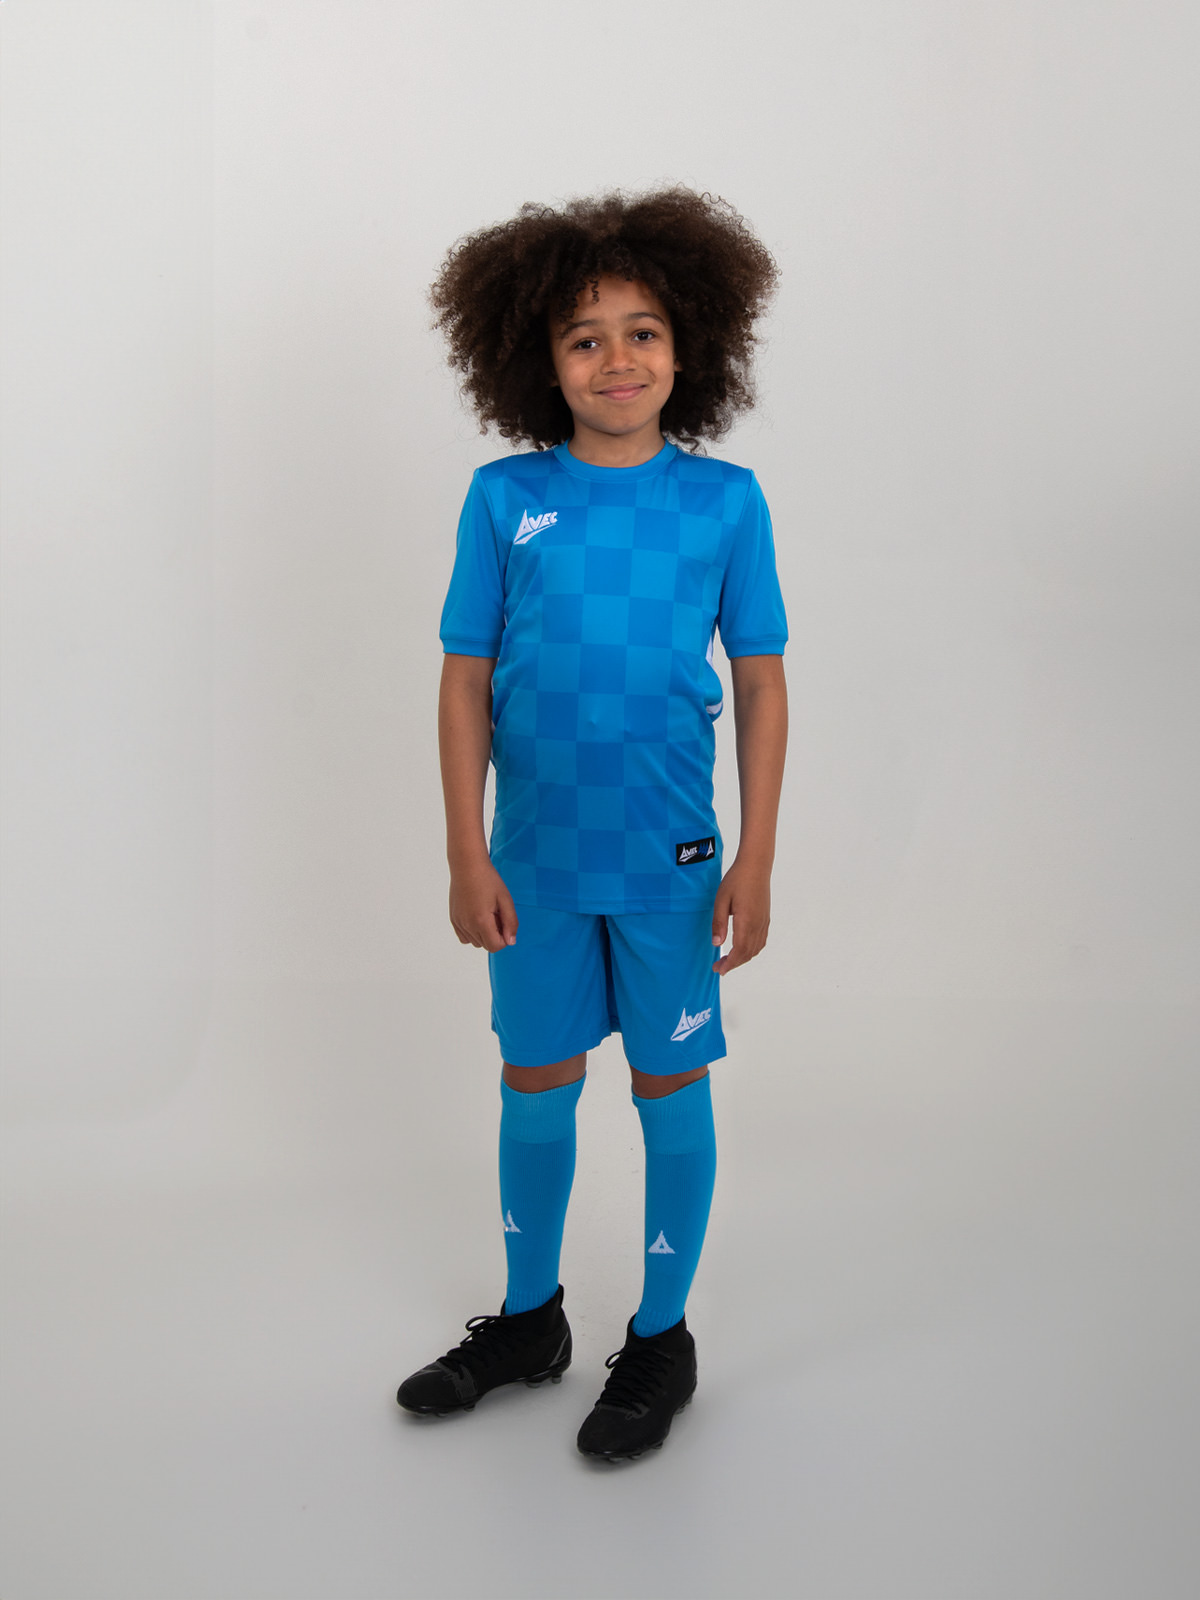 a juniors full sky blue football kit is being worn. the shirt has a tonal chequerboard design